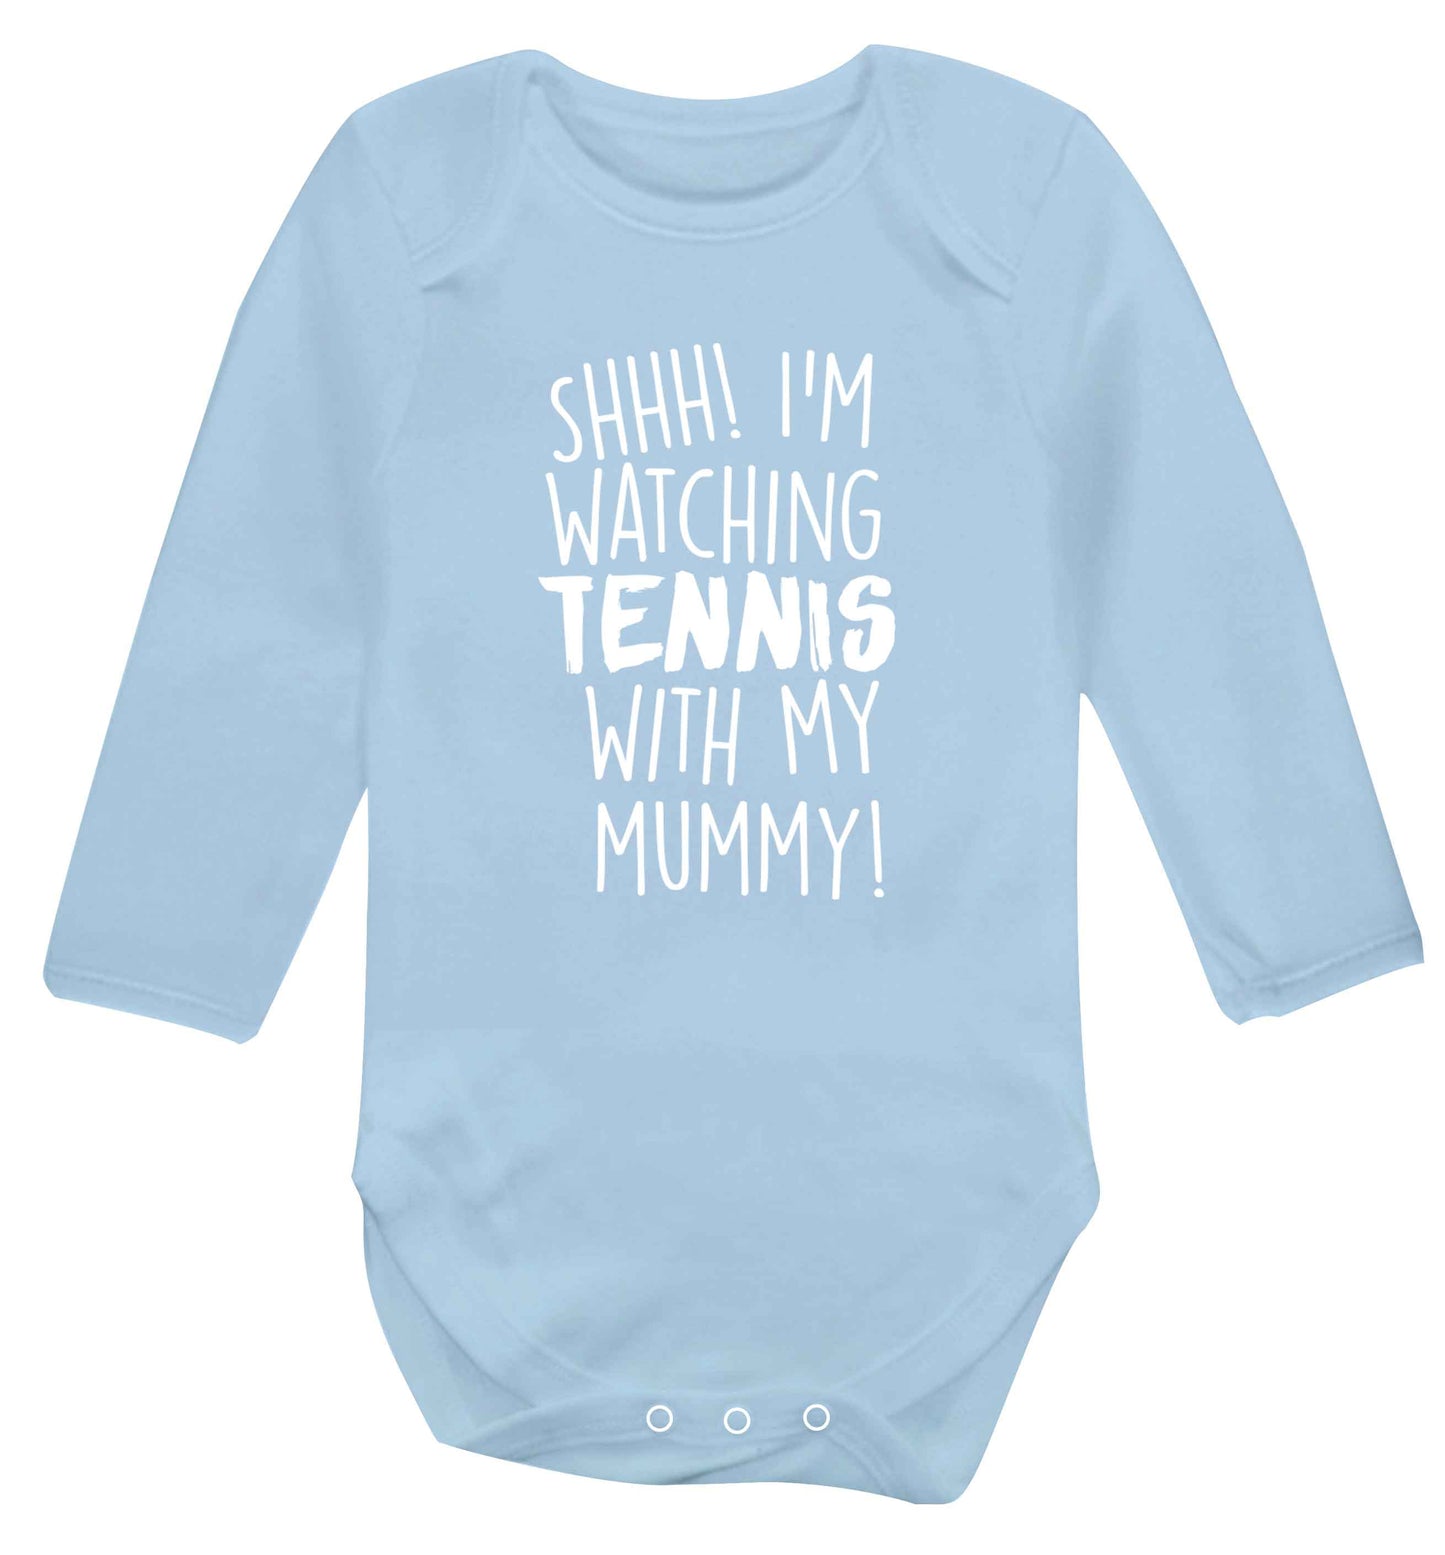 Shh! I'm watching tennis with my mummy! Baby Vest long sleeved pale blue 6-12 months